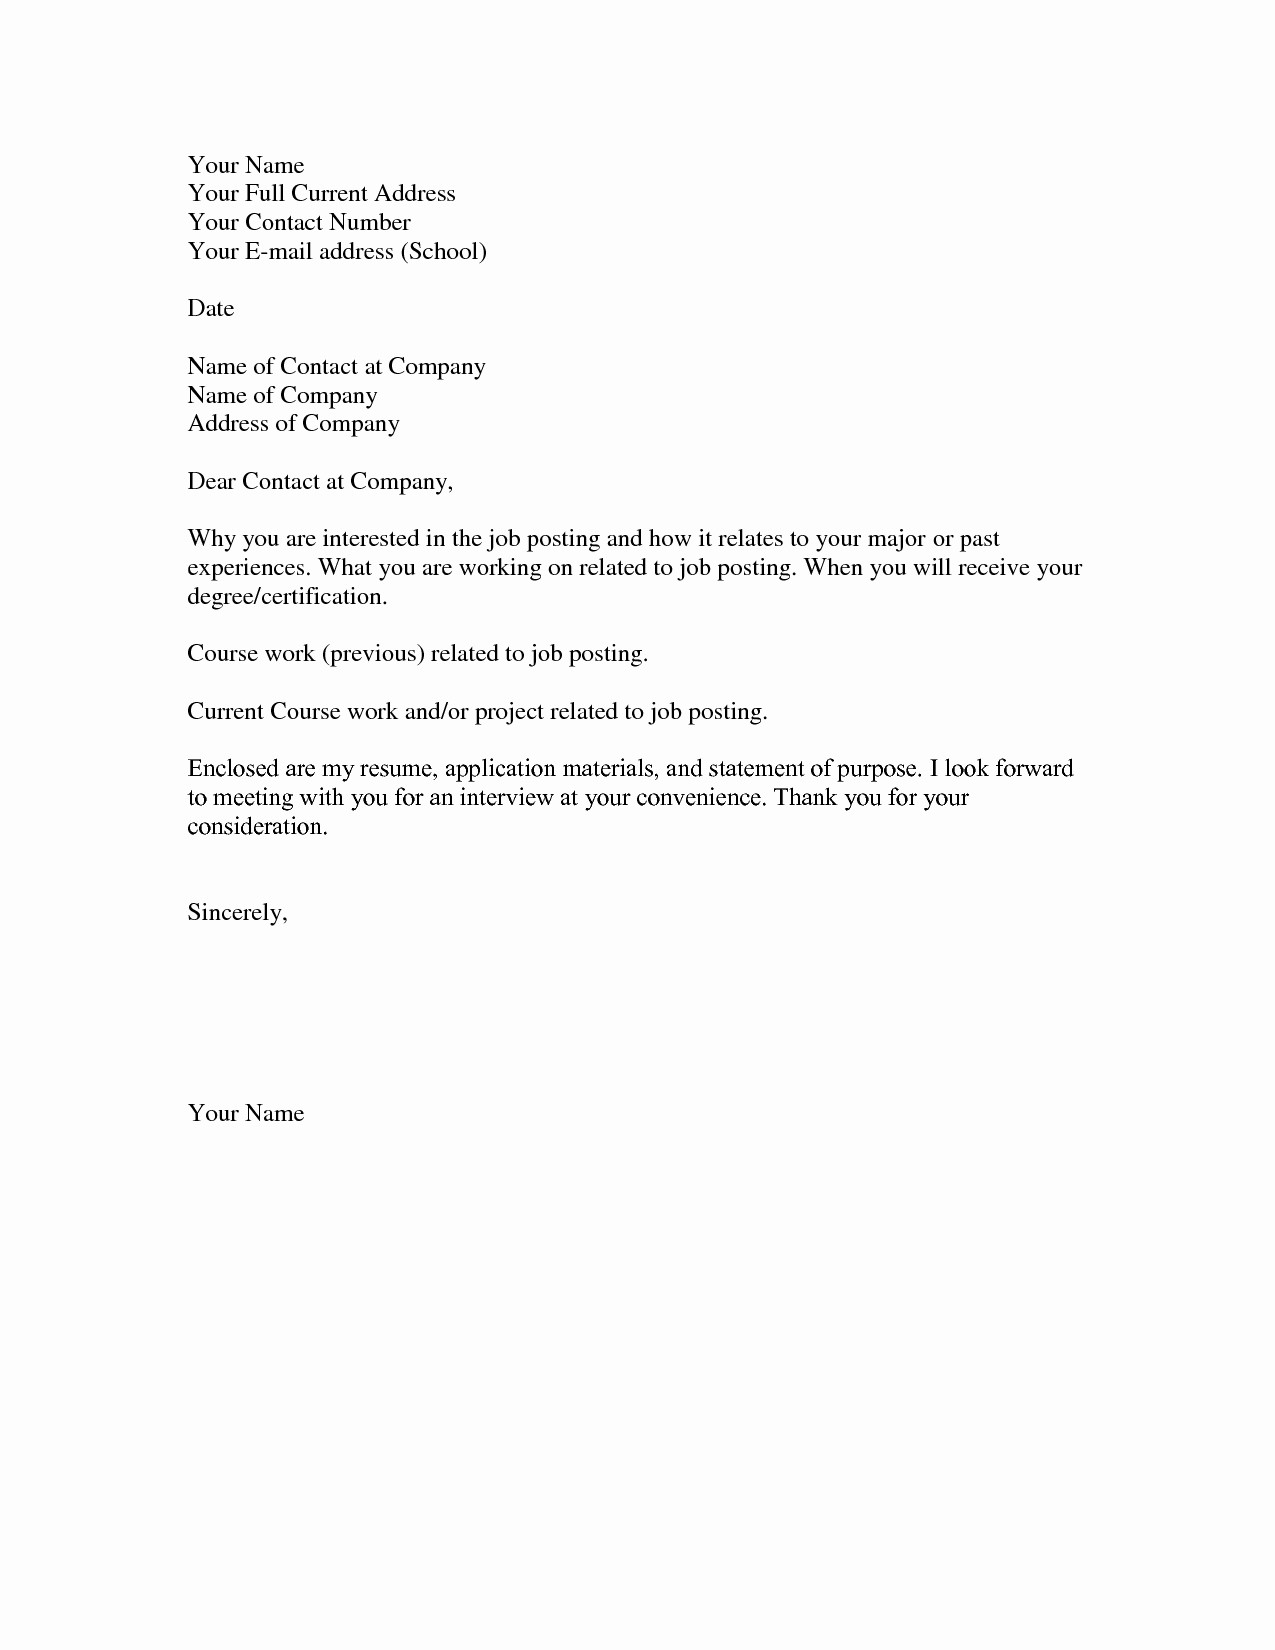 Simple Resume Cover Letter Examples Inspirational Basic Cover Letter for A Resume